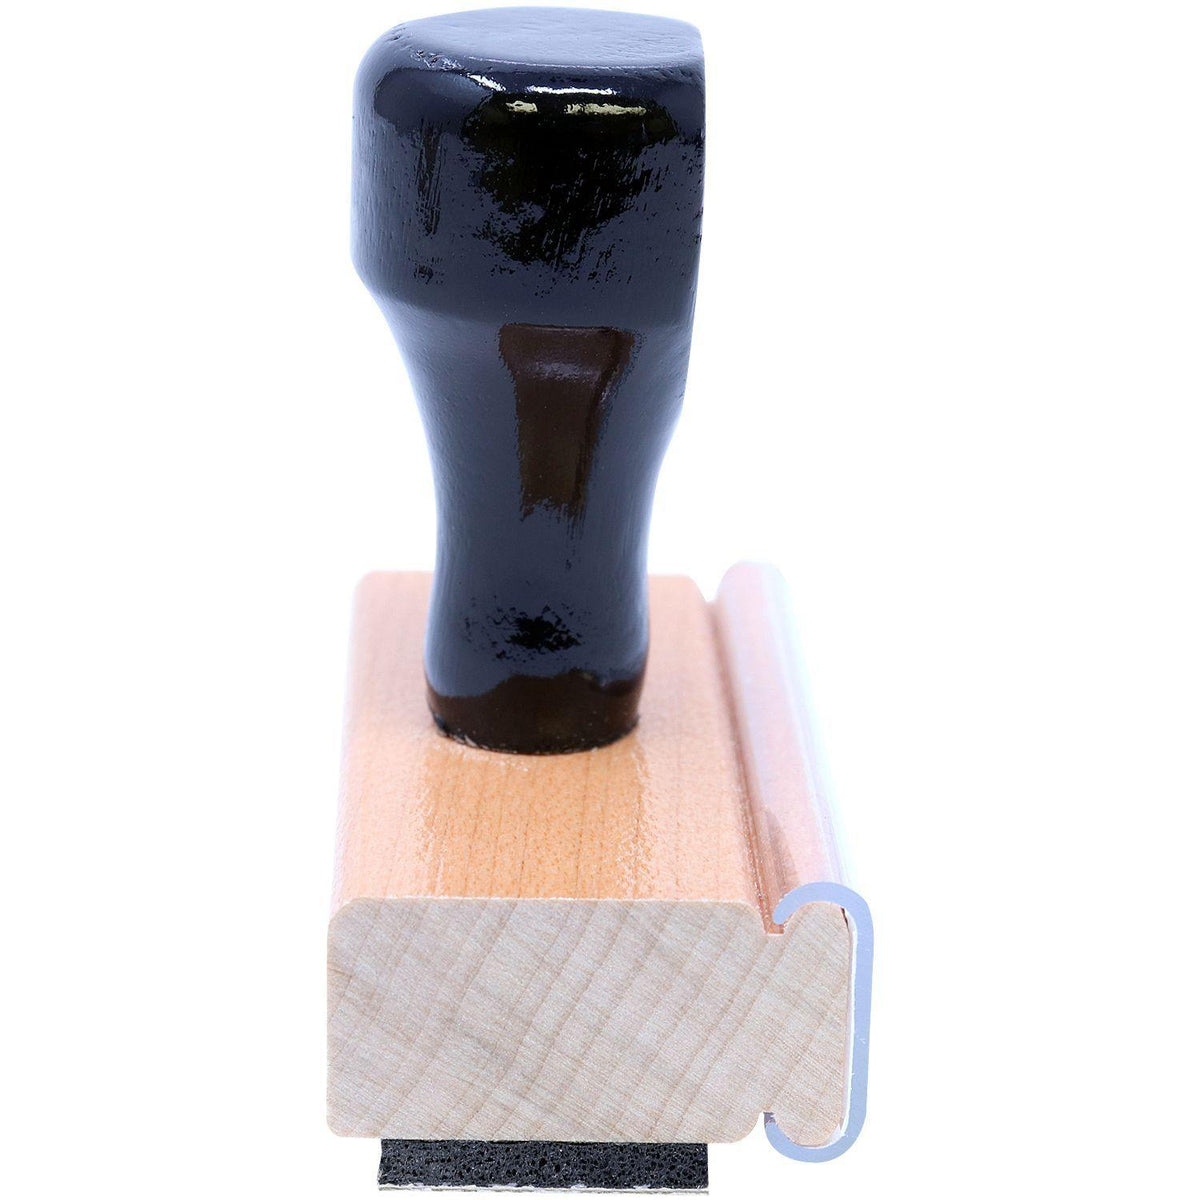 Outline Sample Rubber Stamp - Engineer Seal Stamps - Brand_Acorn, Impression Size_Small, Stamp Type_Regular Stamp, Type of Use_Business, Type of Use_General, Type of Use_Office